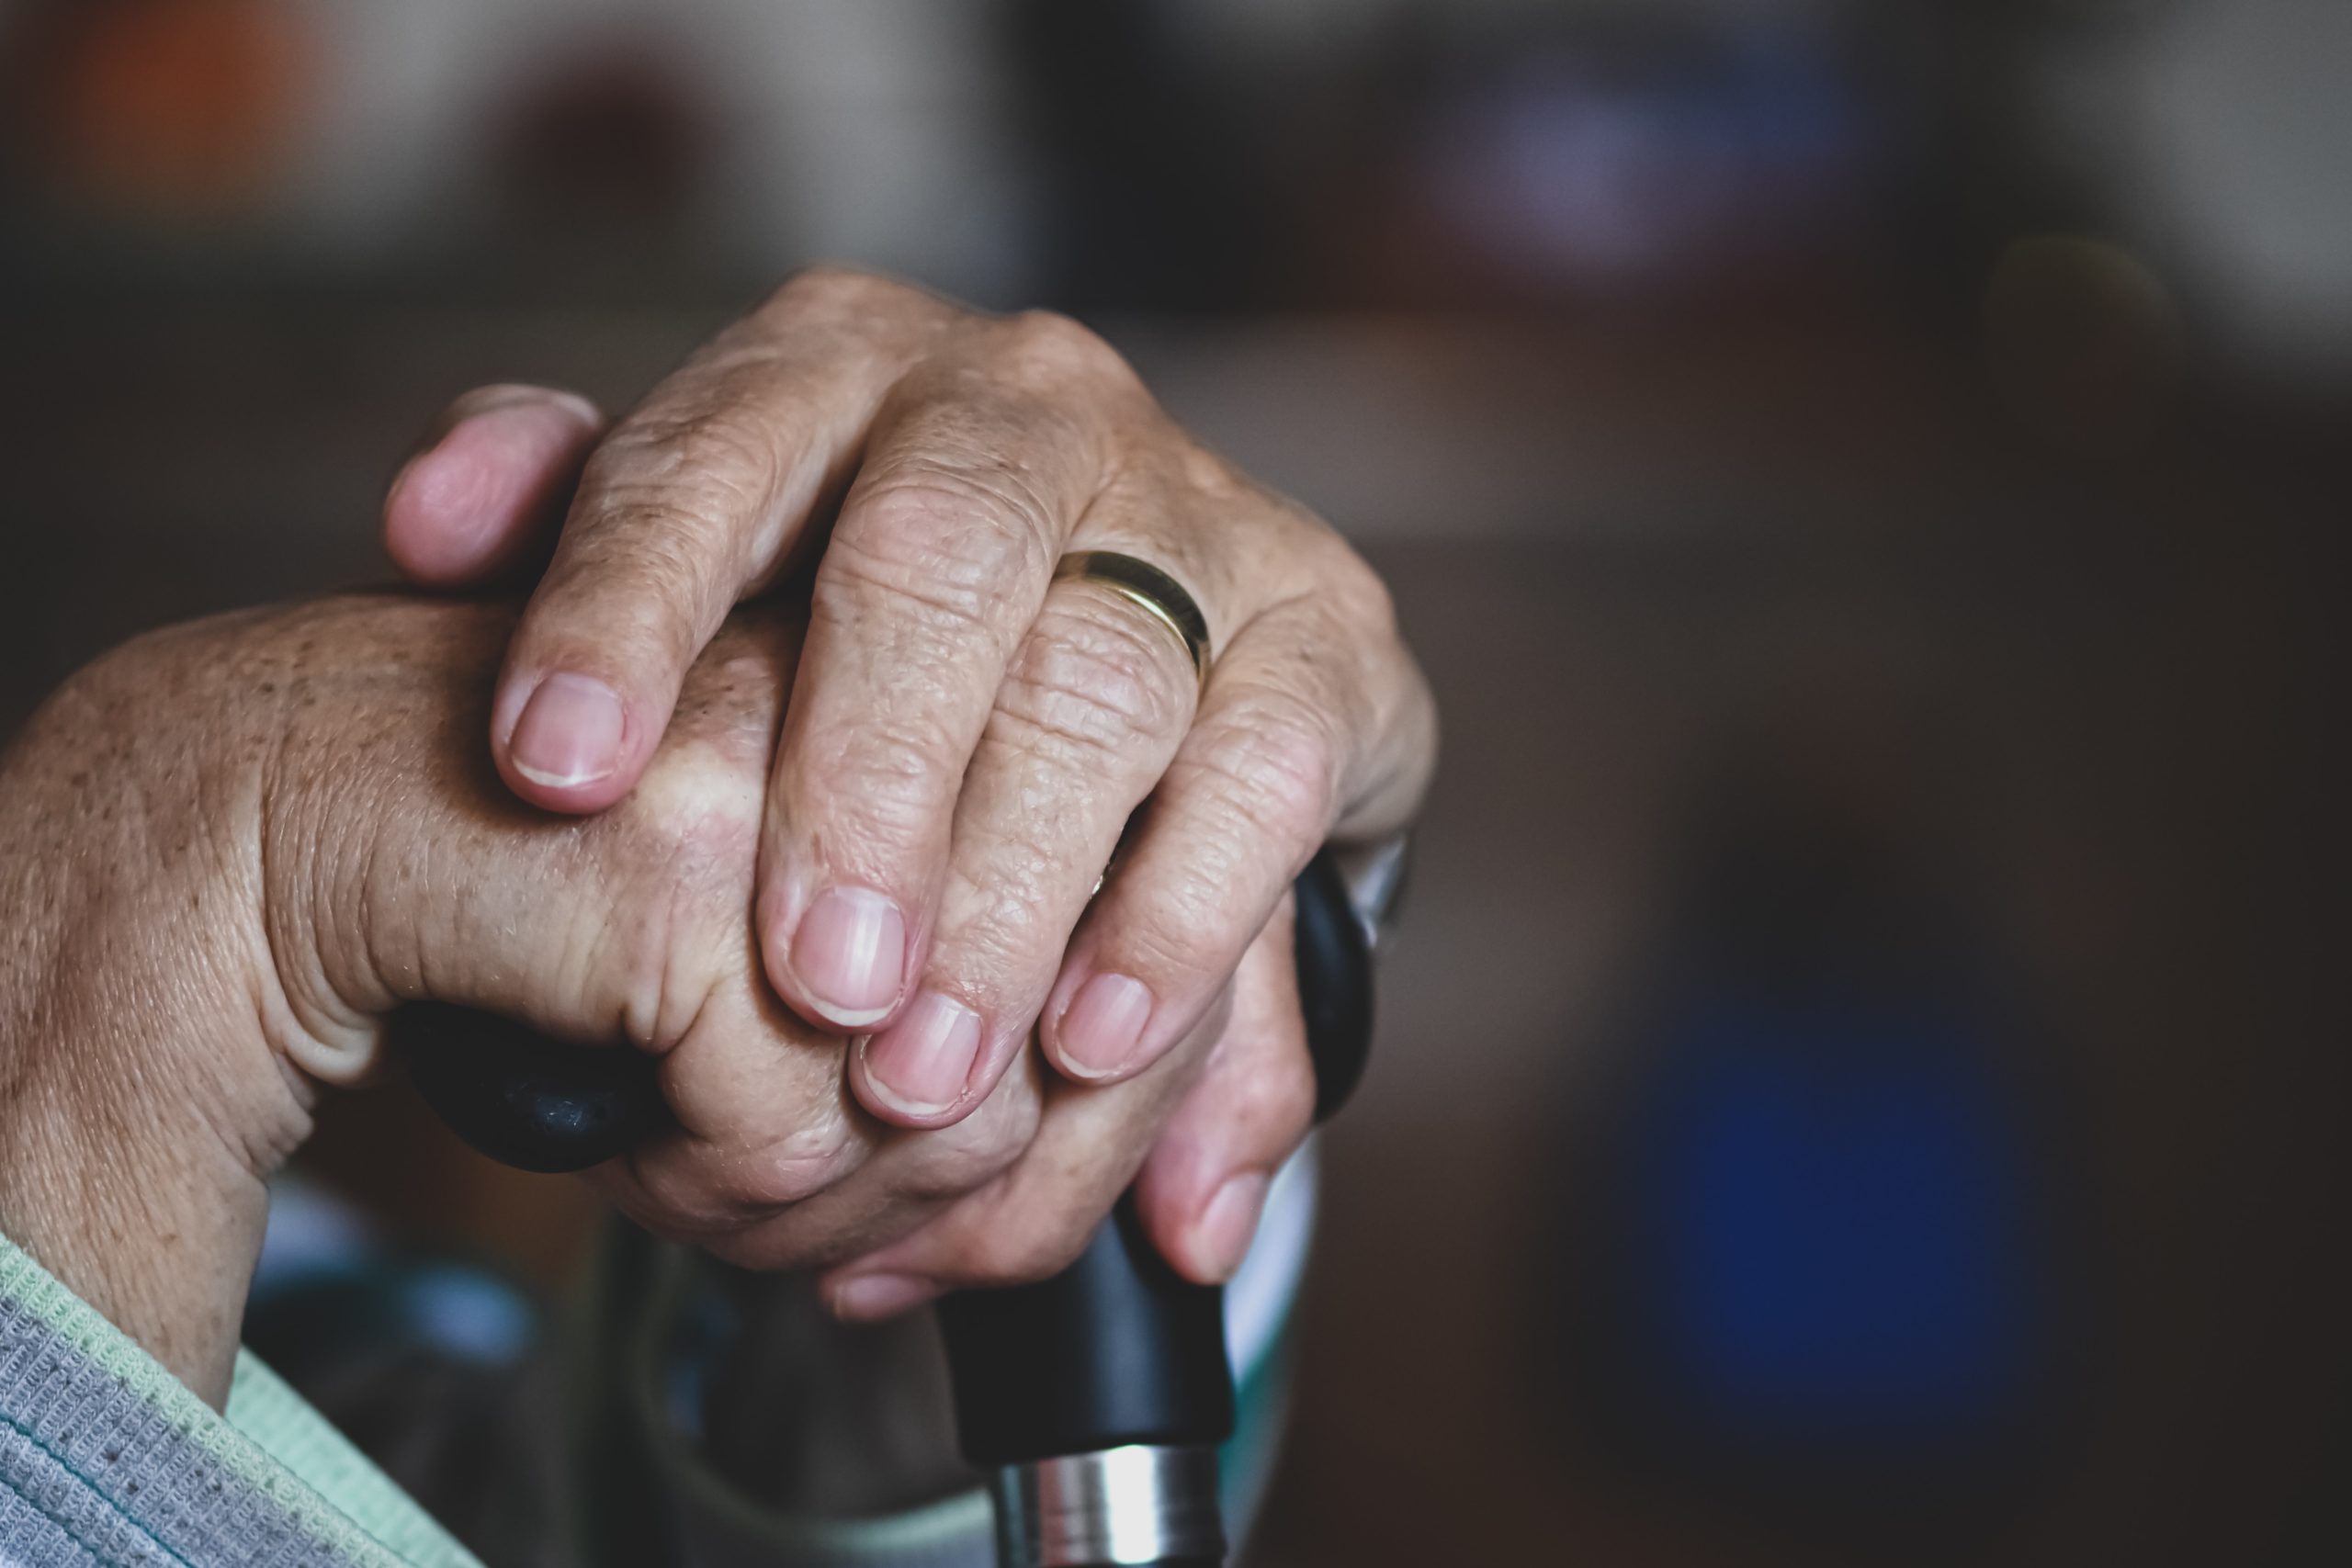 Hands of a senior citizen with a wedding band on ring finger, resting on a cane.